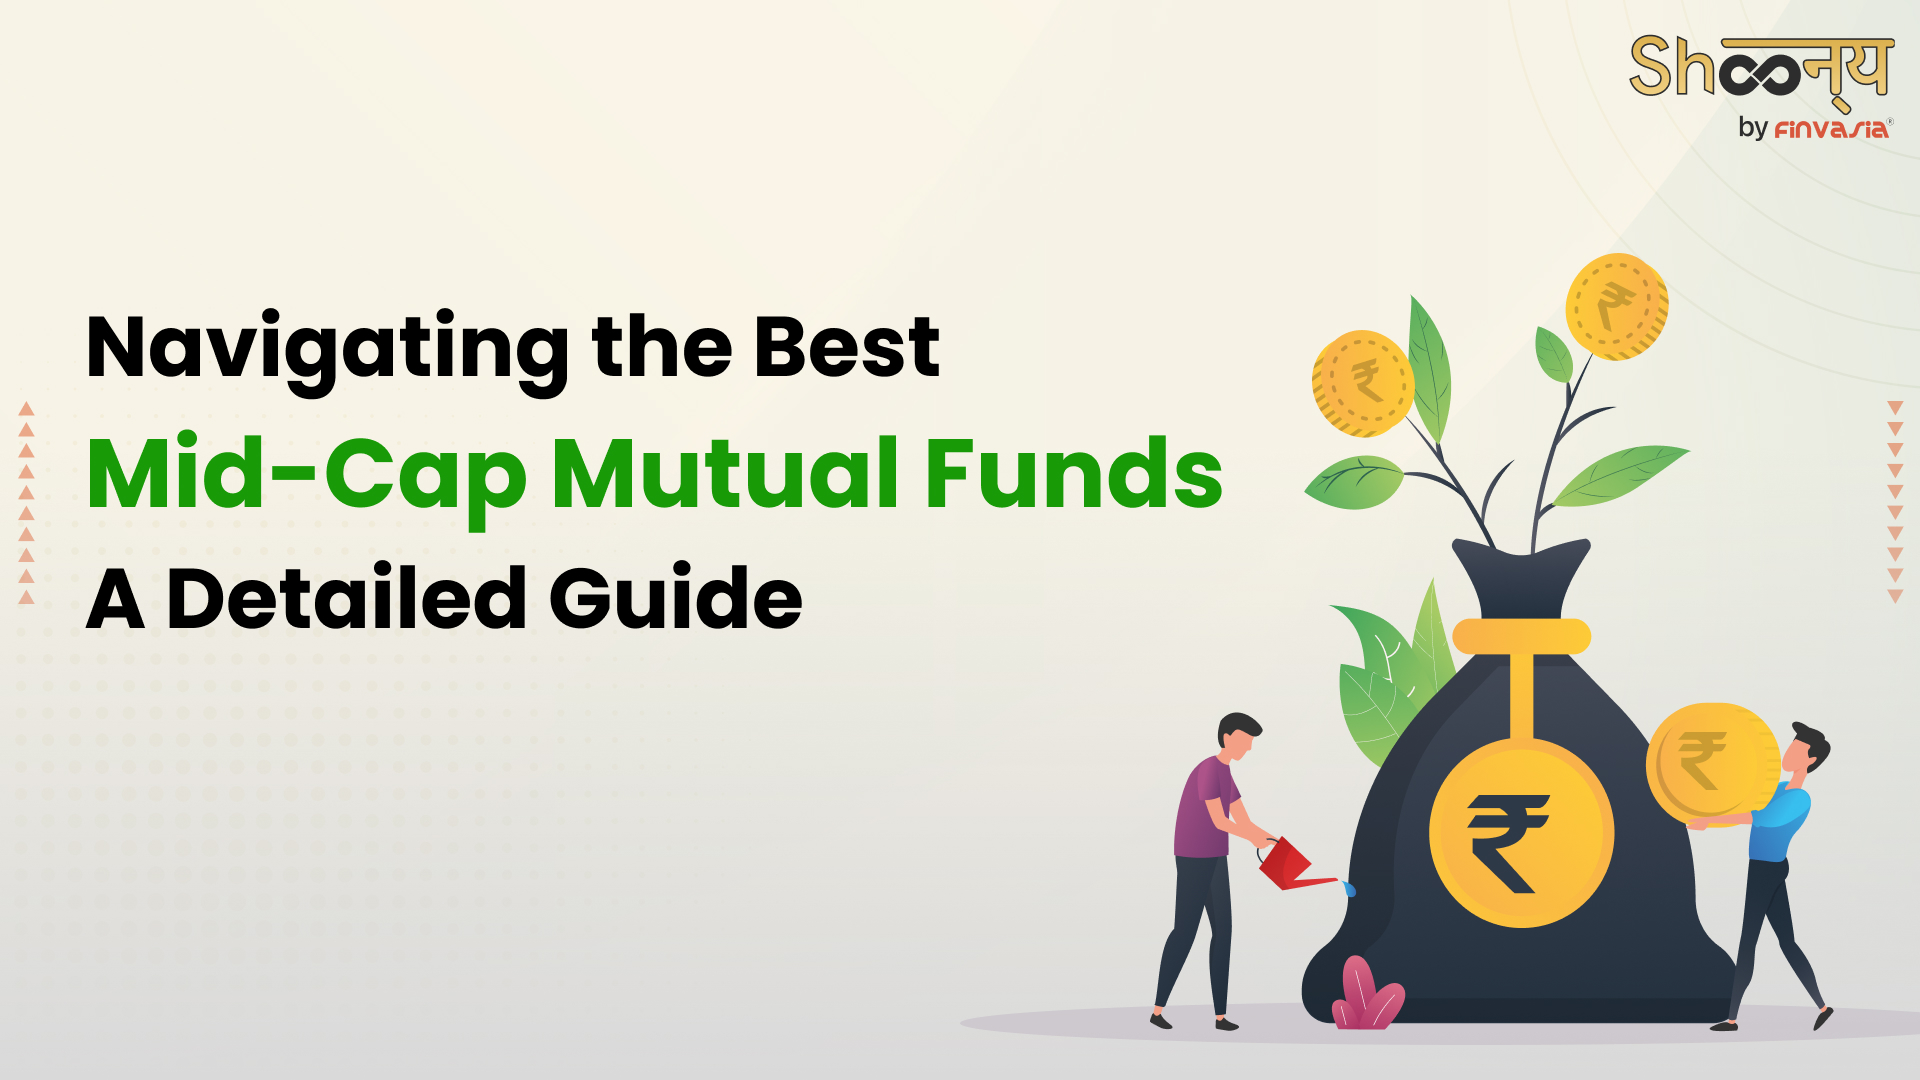 Navigating the Best Mid-Cap Mutual Funds: A Detailed Guide